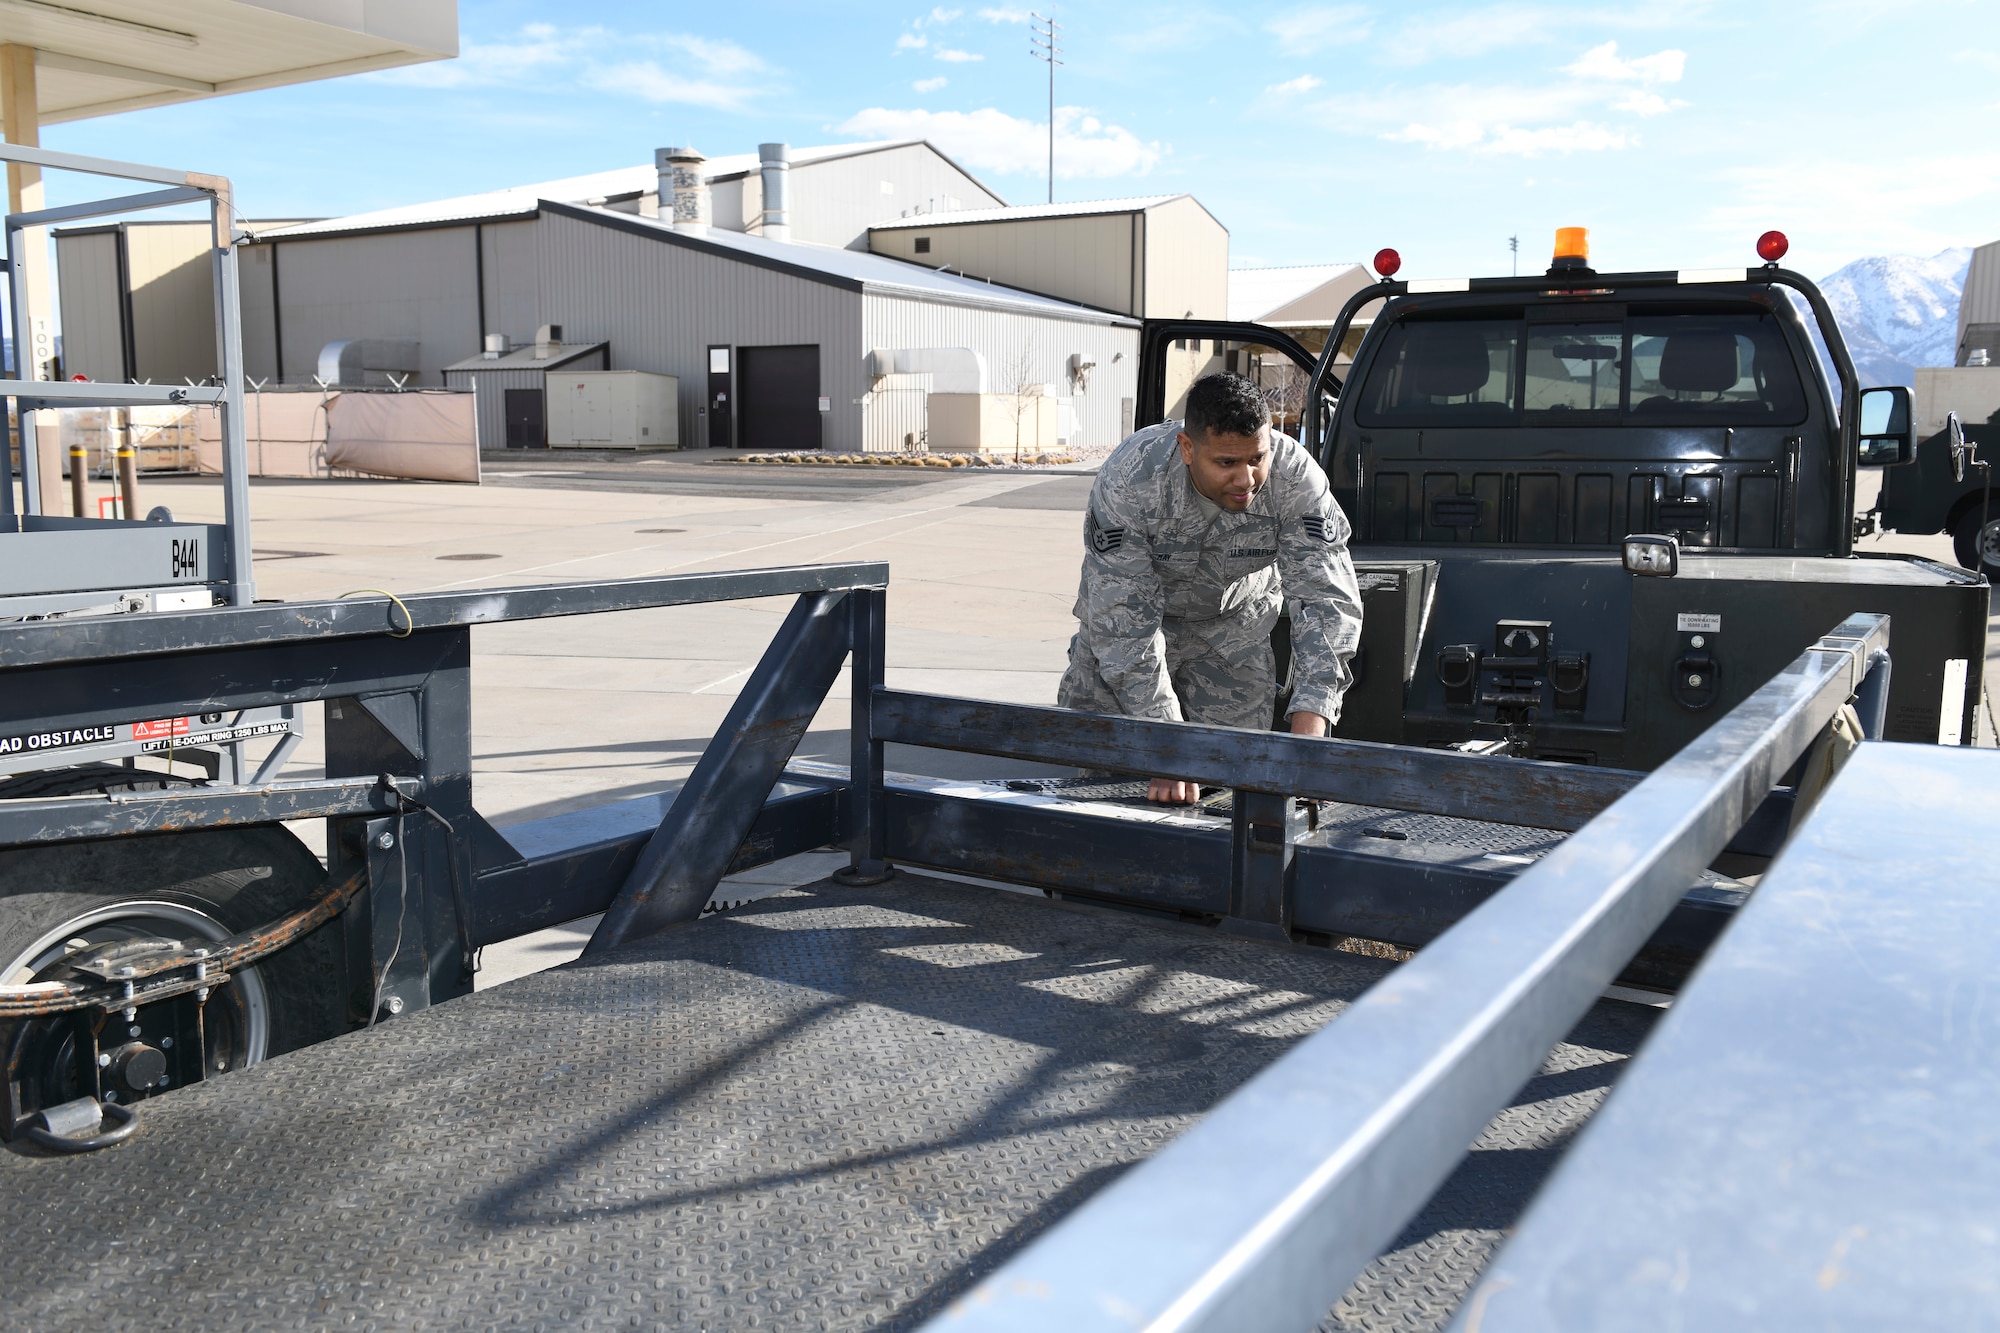 Staff Sgt. Emmanuel May, an Aerospace Ground Equipment mechanic in the 419th Maintenance Squadron, unloads a trailer March 7, 2020, at Hill Air Force Base, Utah